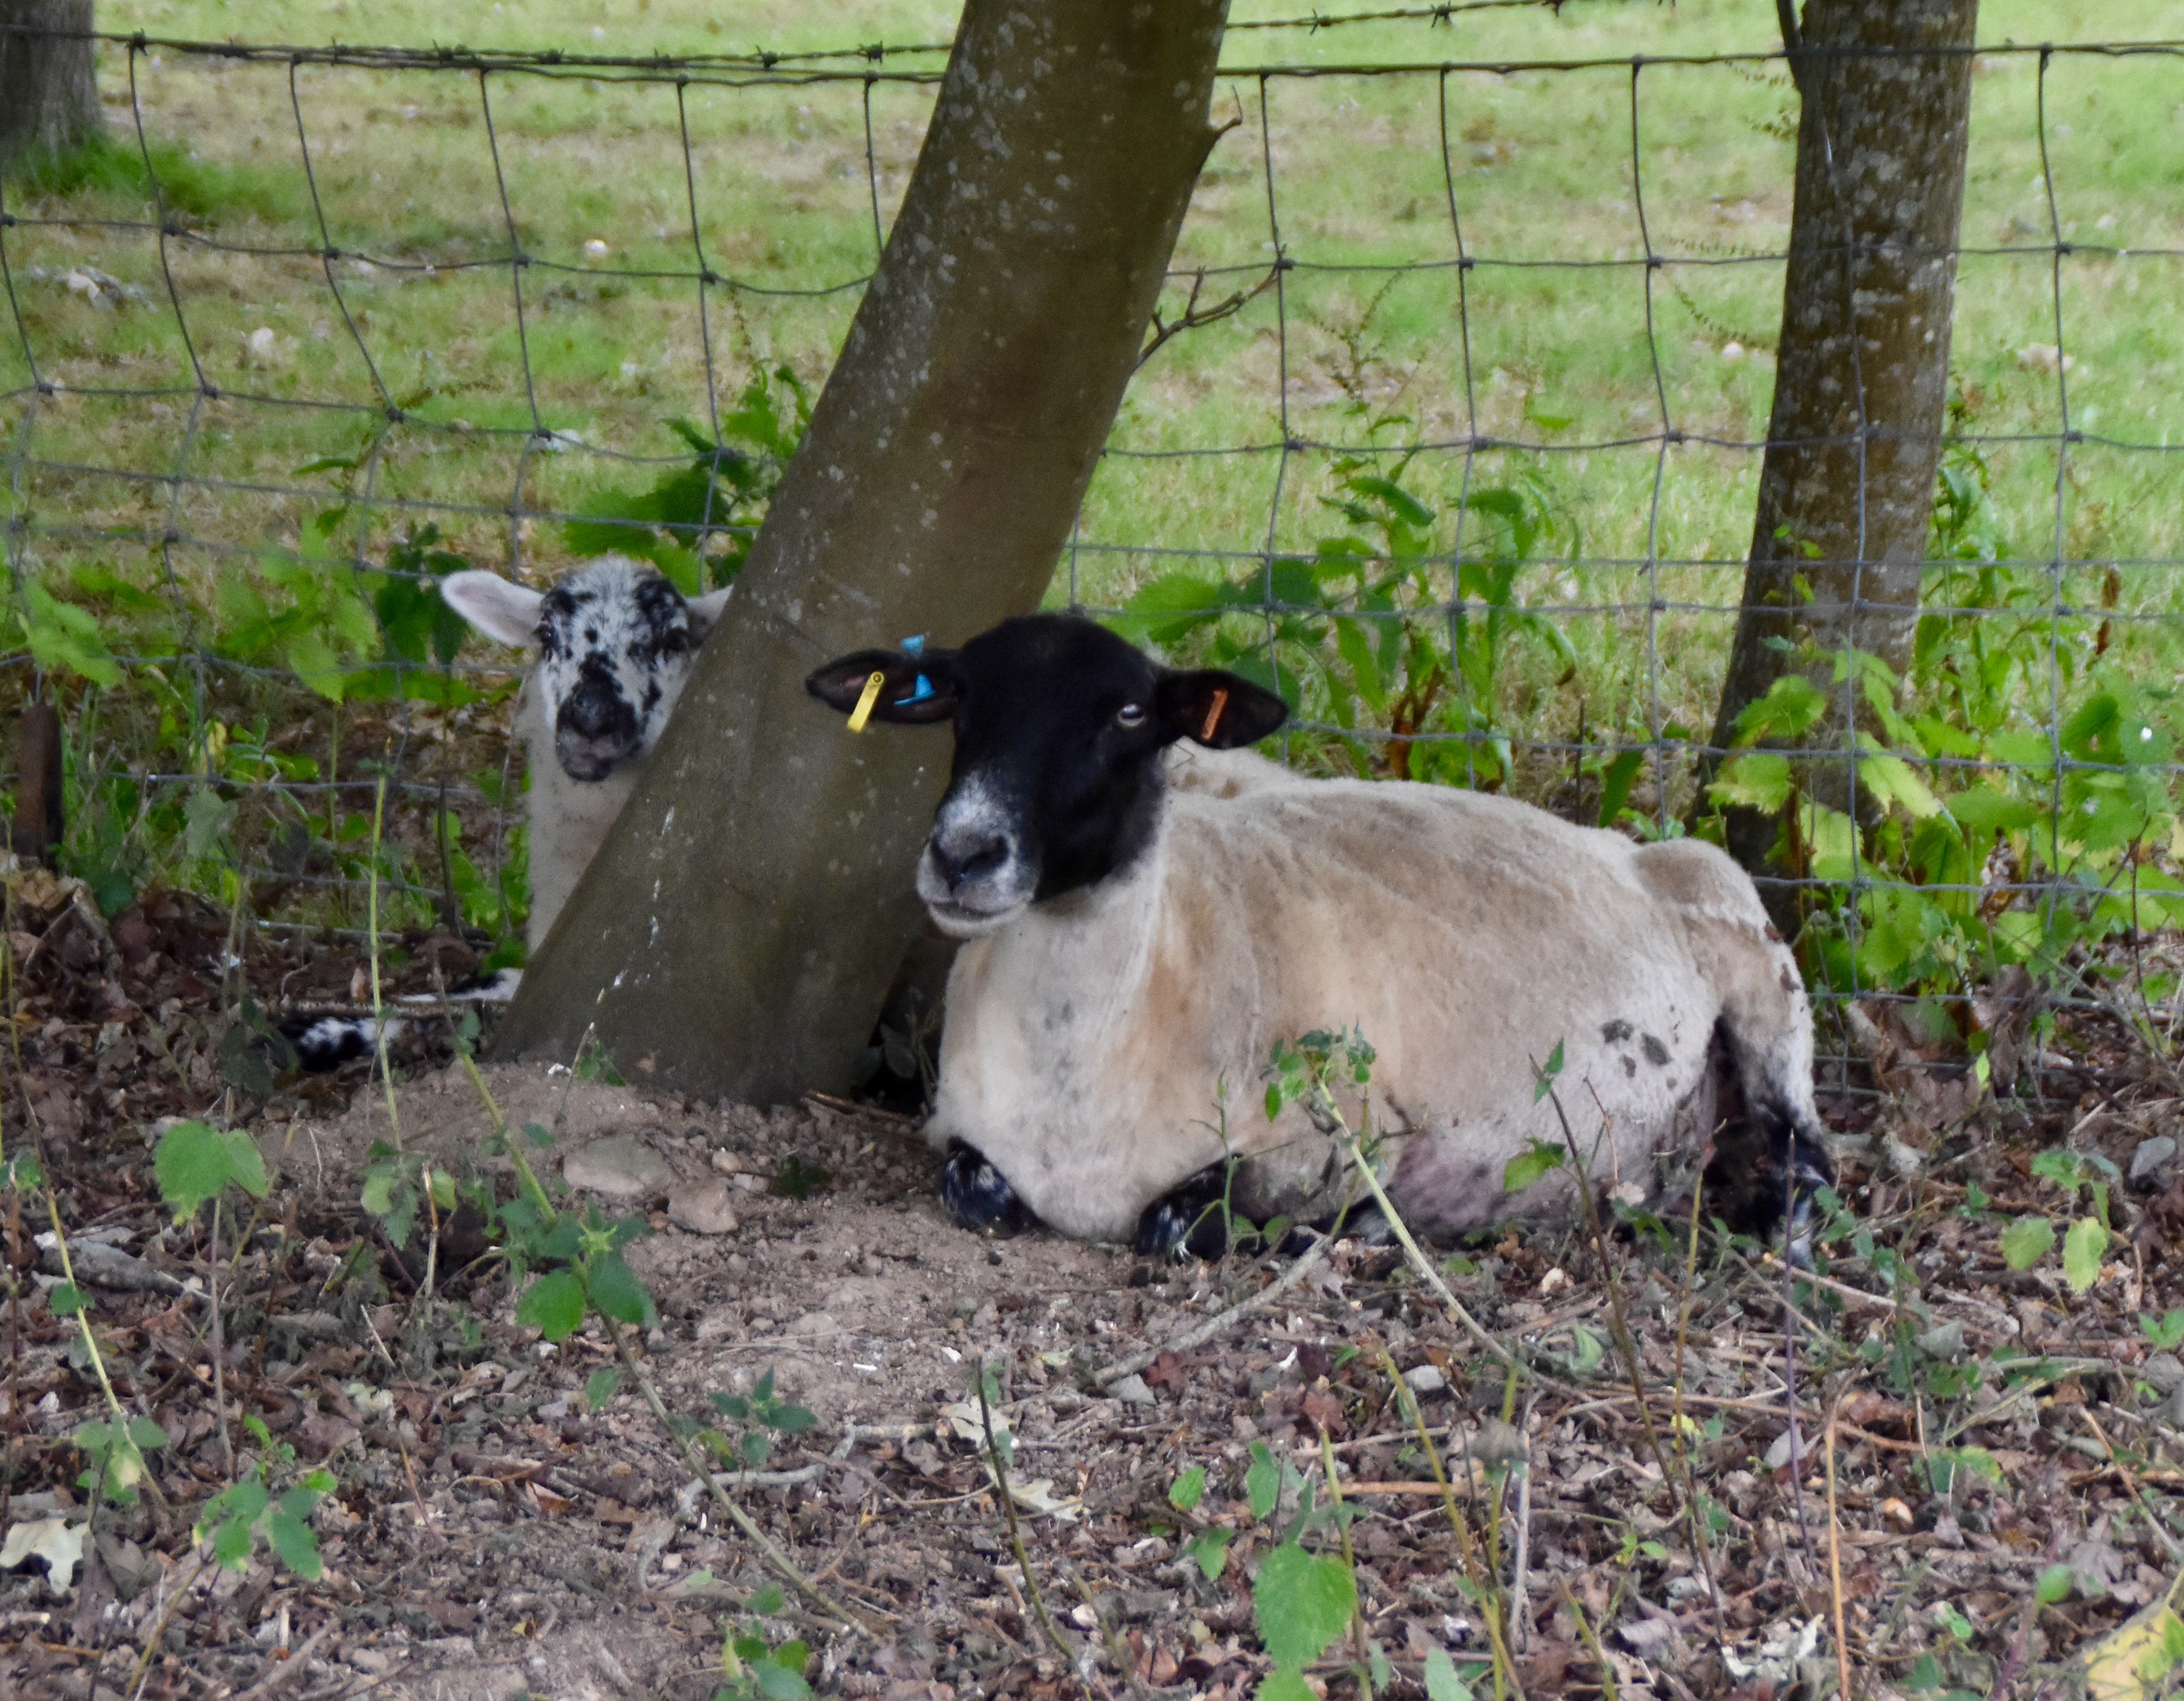 Sheep on the Battle of Hastings site